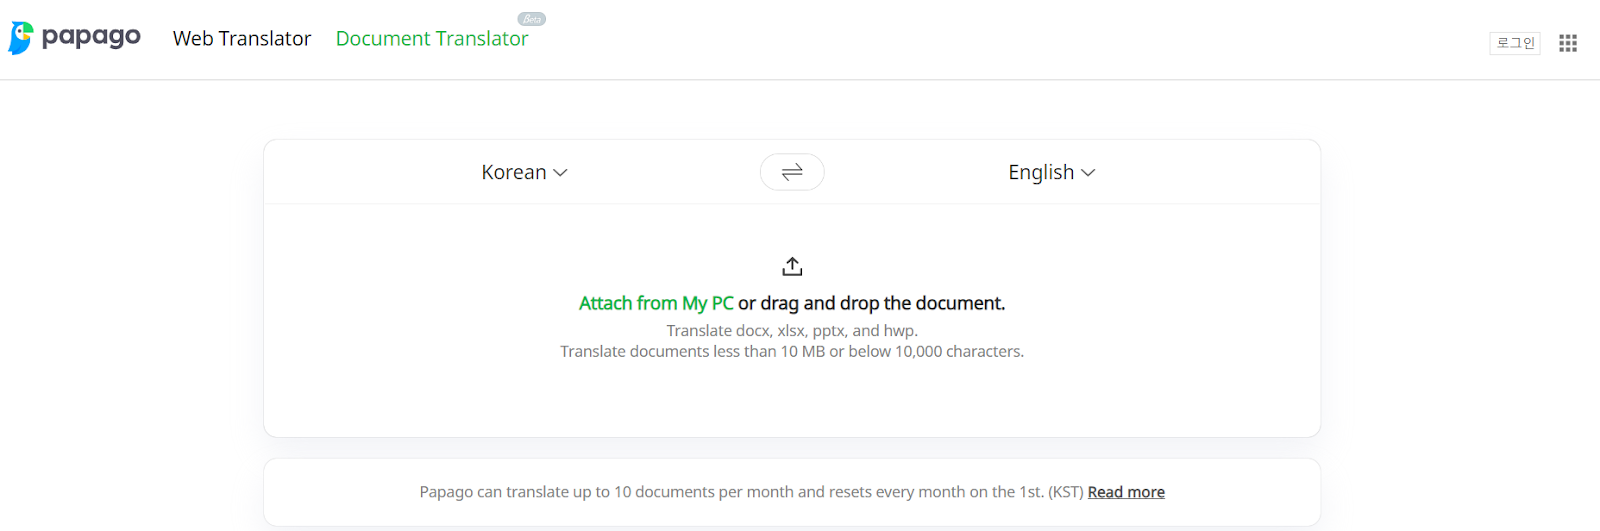 Naver Translate: Everything You Ever Wanted to Know